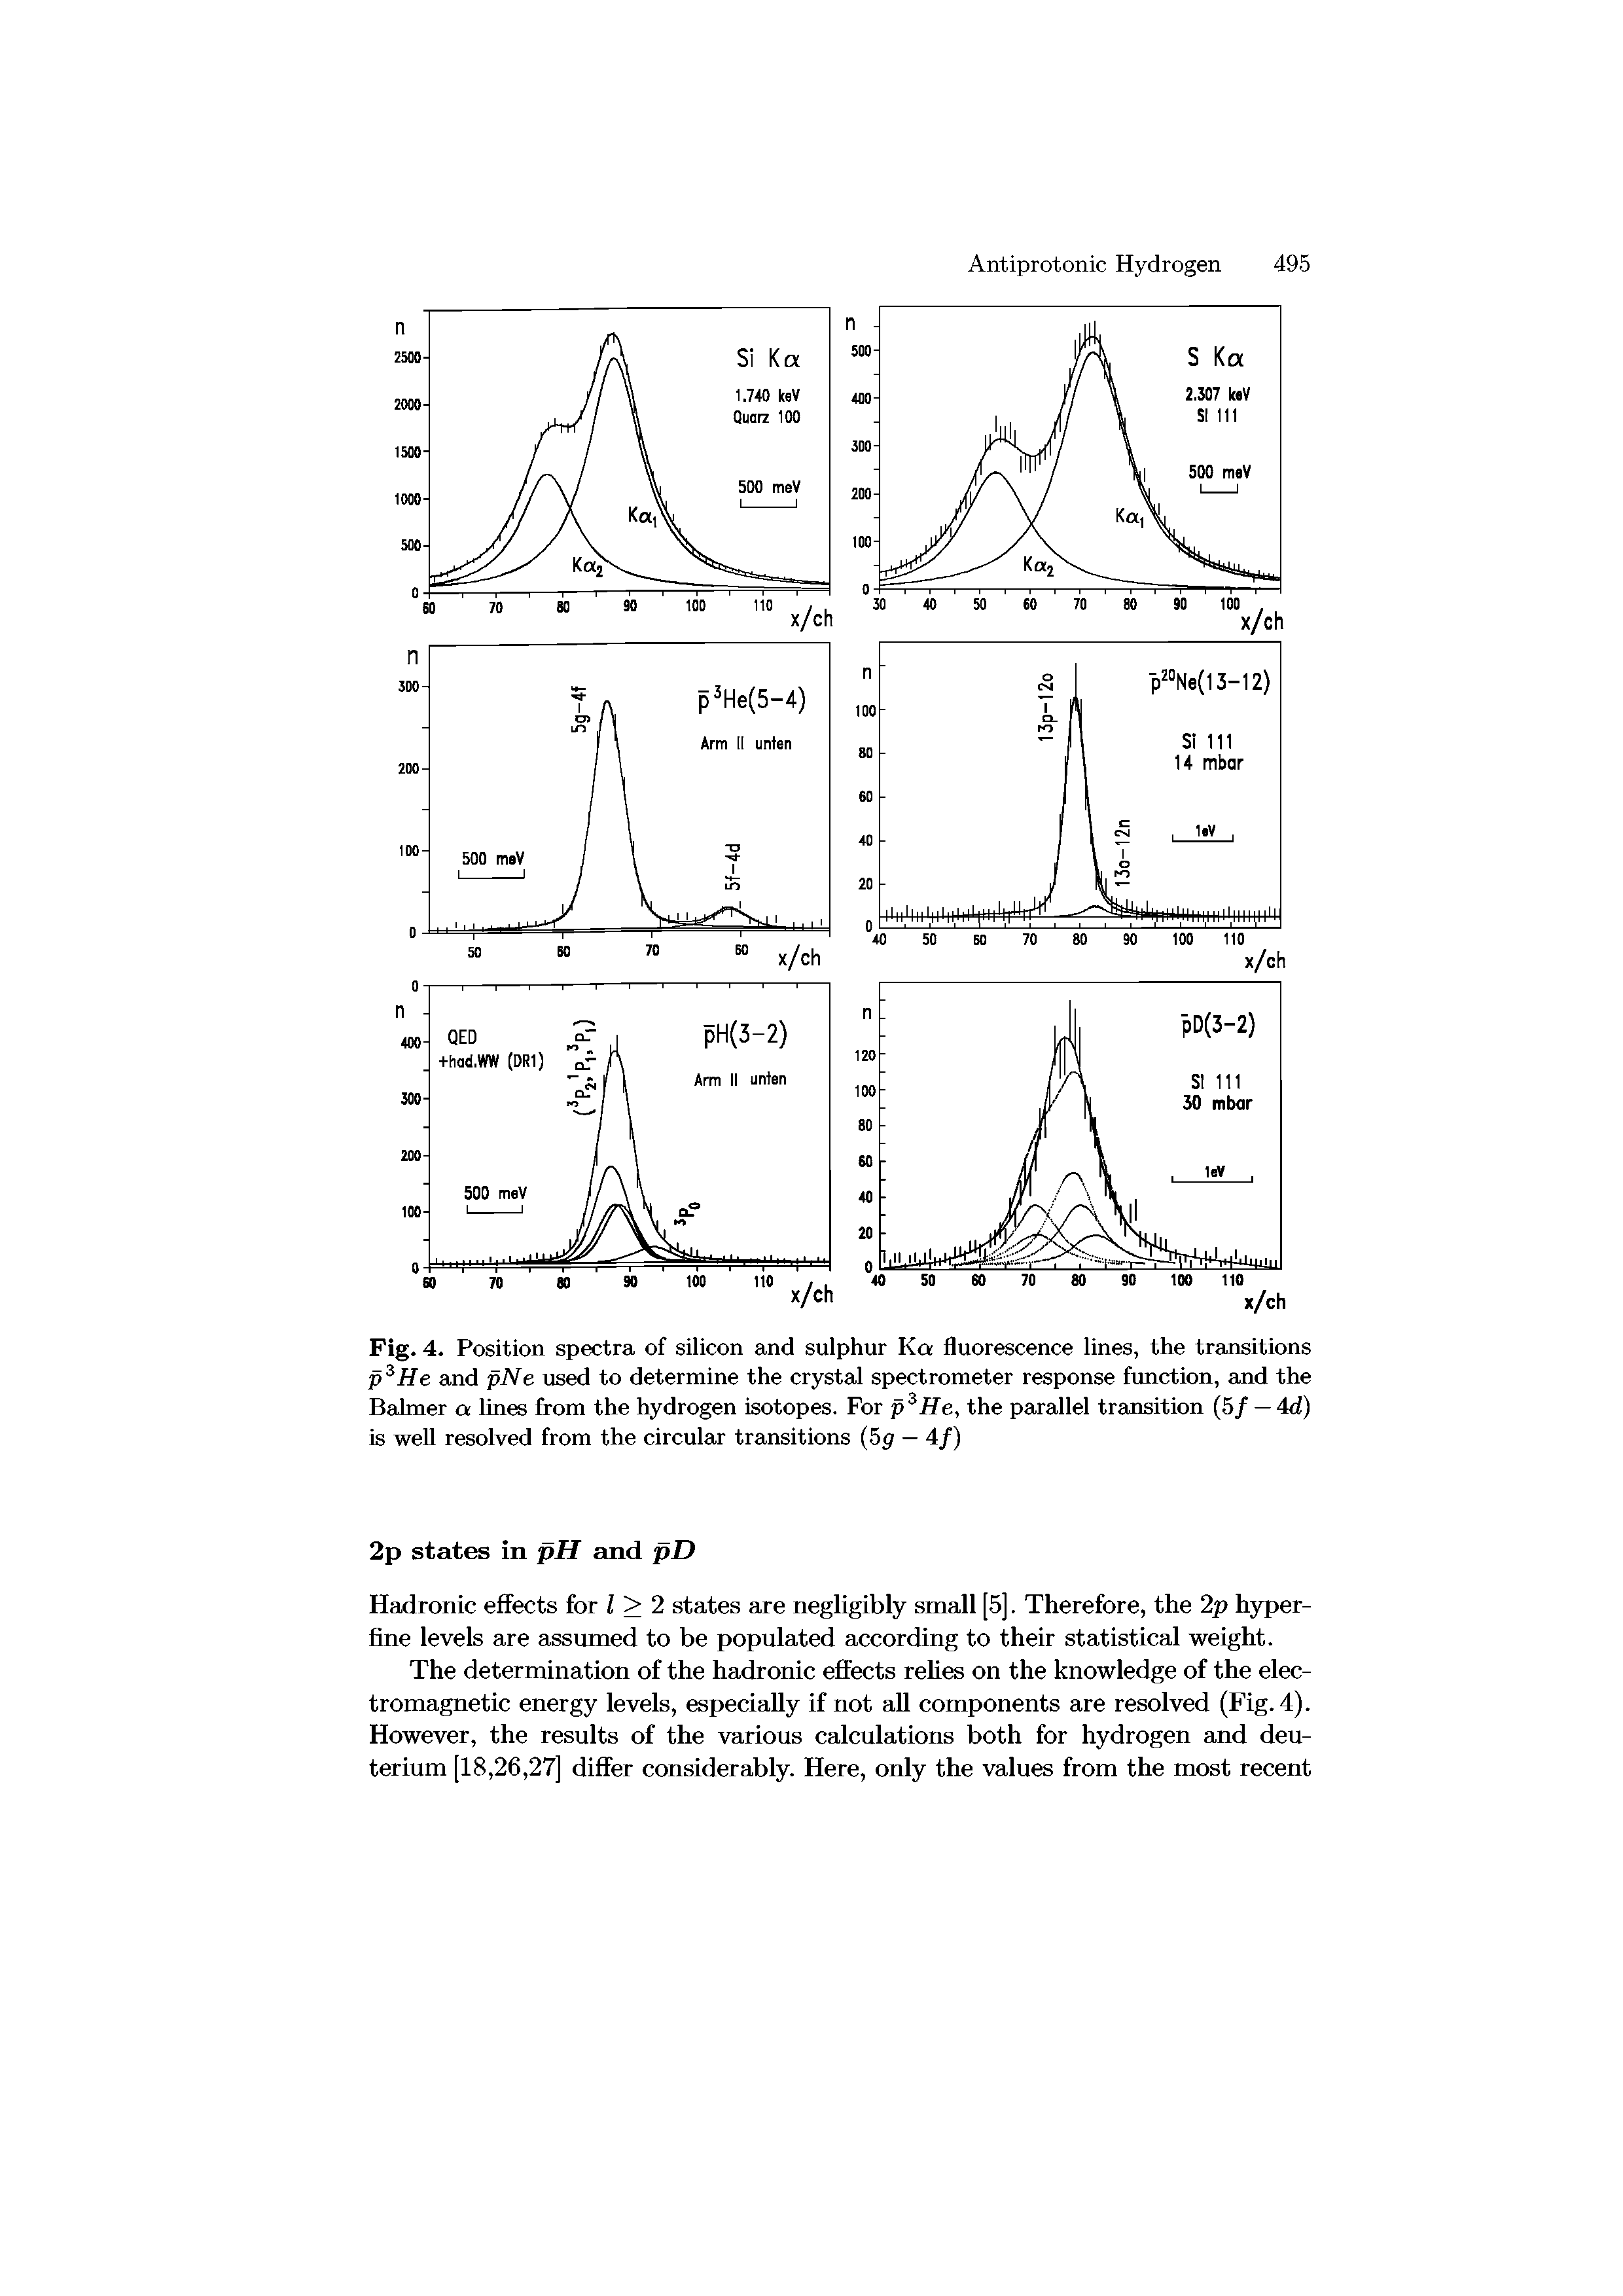 Fig. 4. Position spectra of silicon and sulphur Ka fluorescence lines, the transitions p3He and pNe used to determine the crystal spectrometer response function, and the Rainier a lines from the hydrogen isotopes. For p3He, the parallel transition (5/ — 4d) is well resolved from the circular transitions (5g — 4f)...